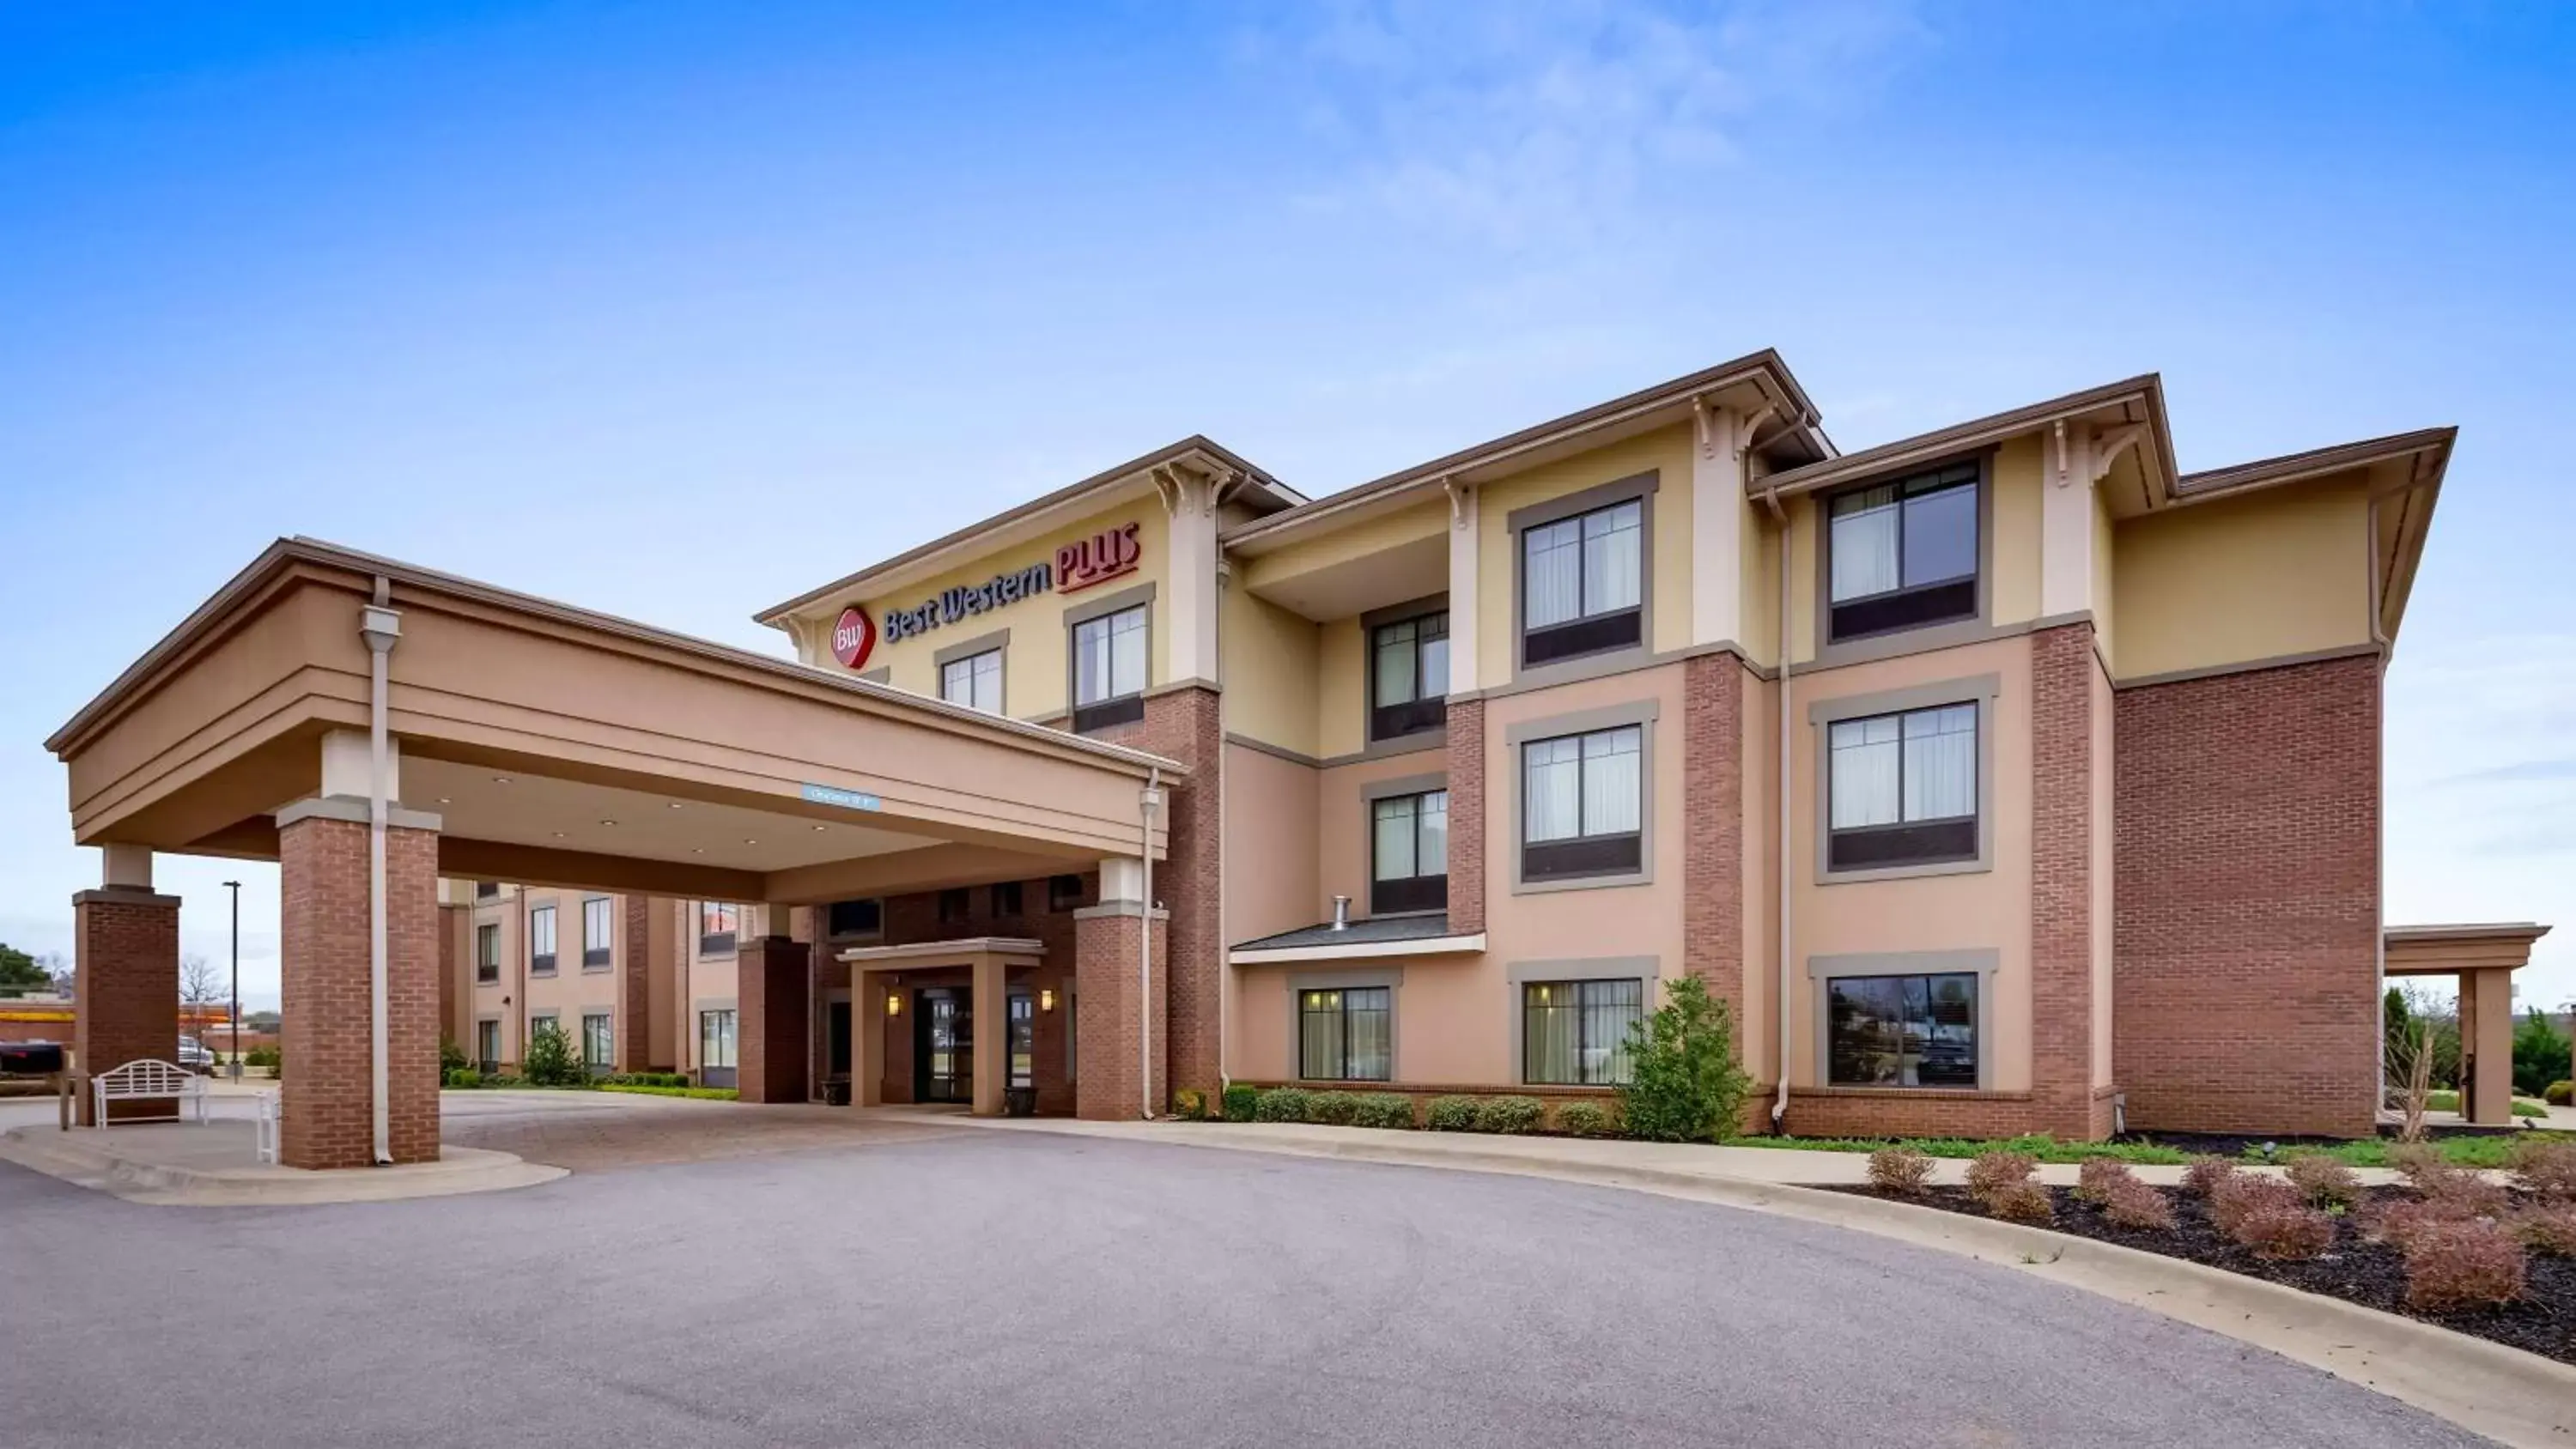 Property Building in Best Western Plus Tuscumbia/Muscle Shoals Hotel & Suites